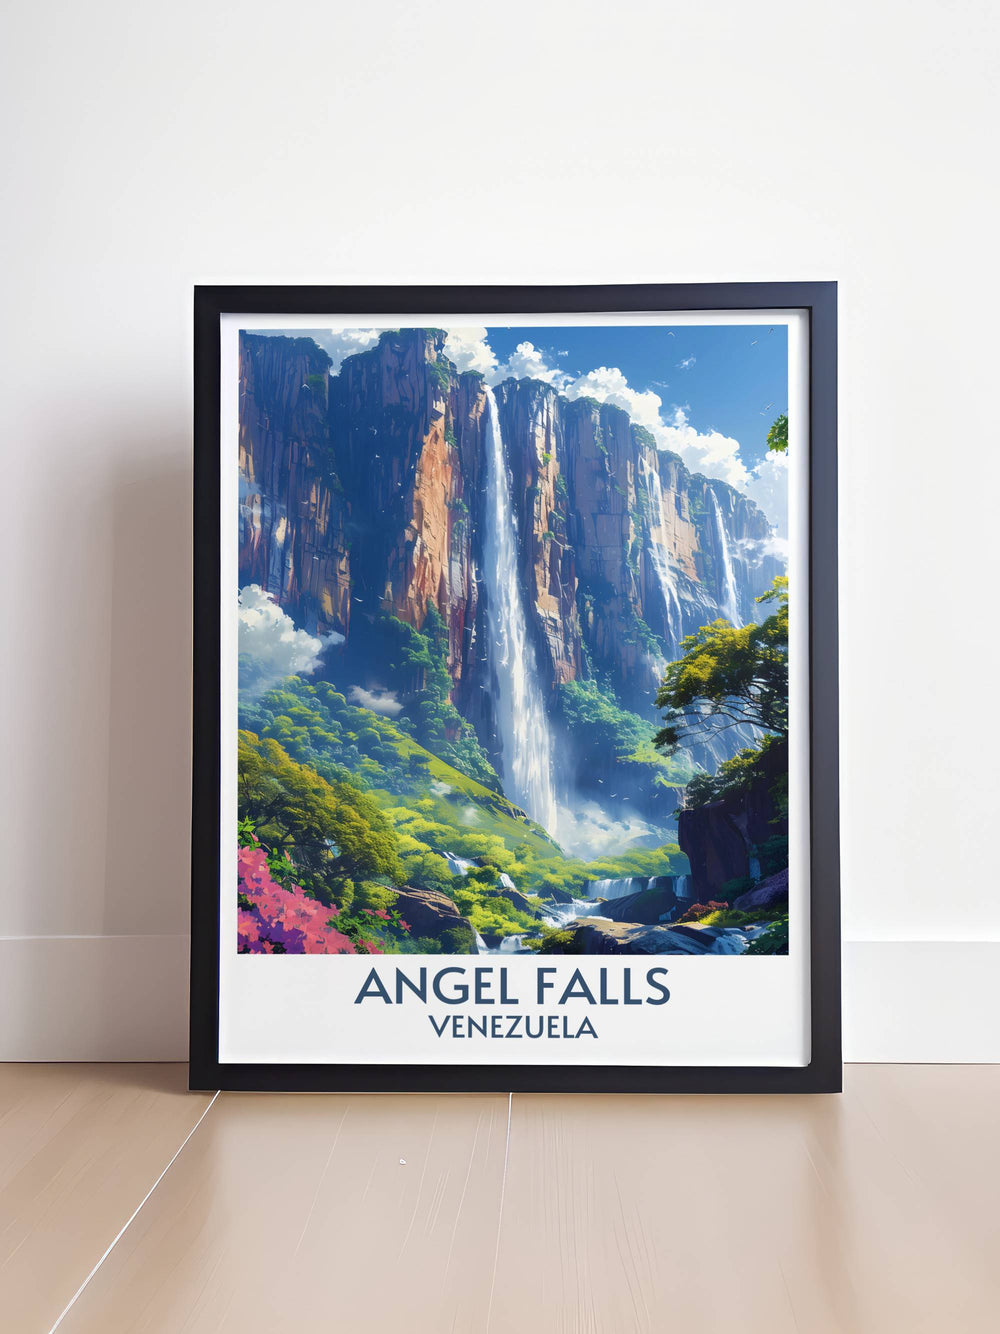 Collectible Venezuela print of Angel Falls, a must-have for any travel and art lover’s collection.